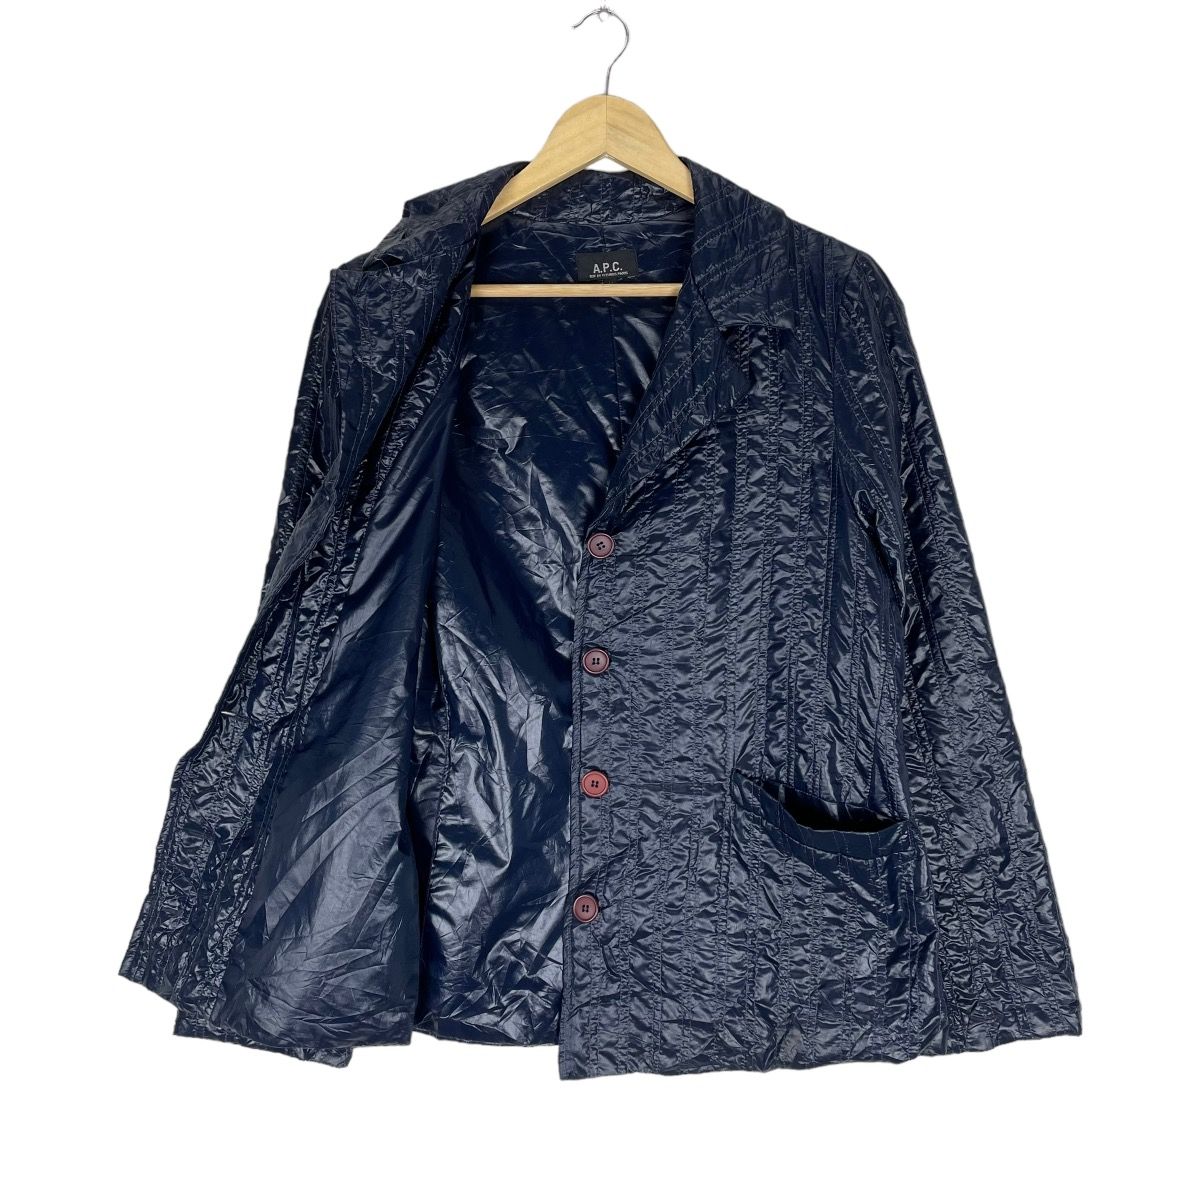 ❄️A.P.C FRANCE QUILTED BUTTON JACKET - 7